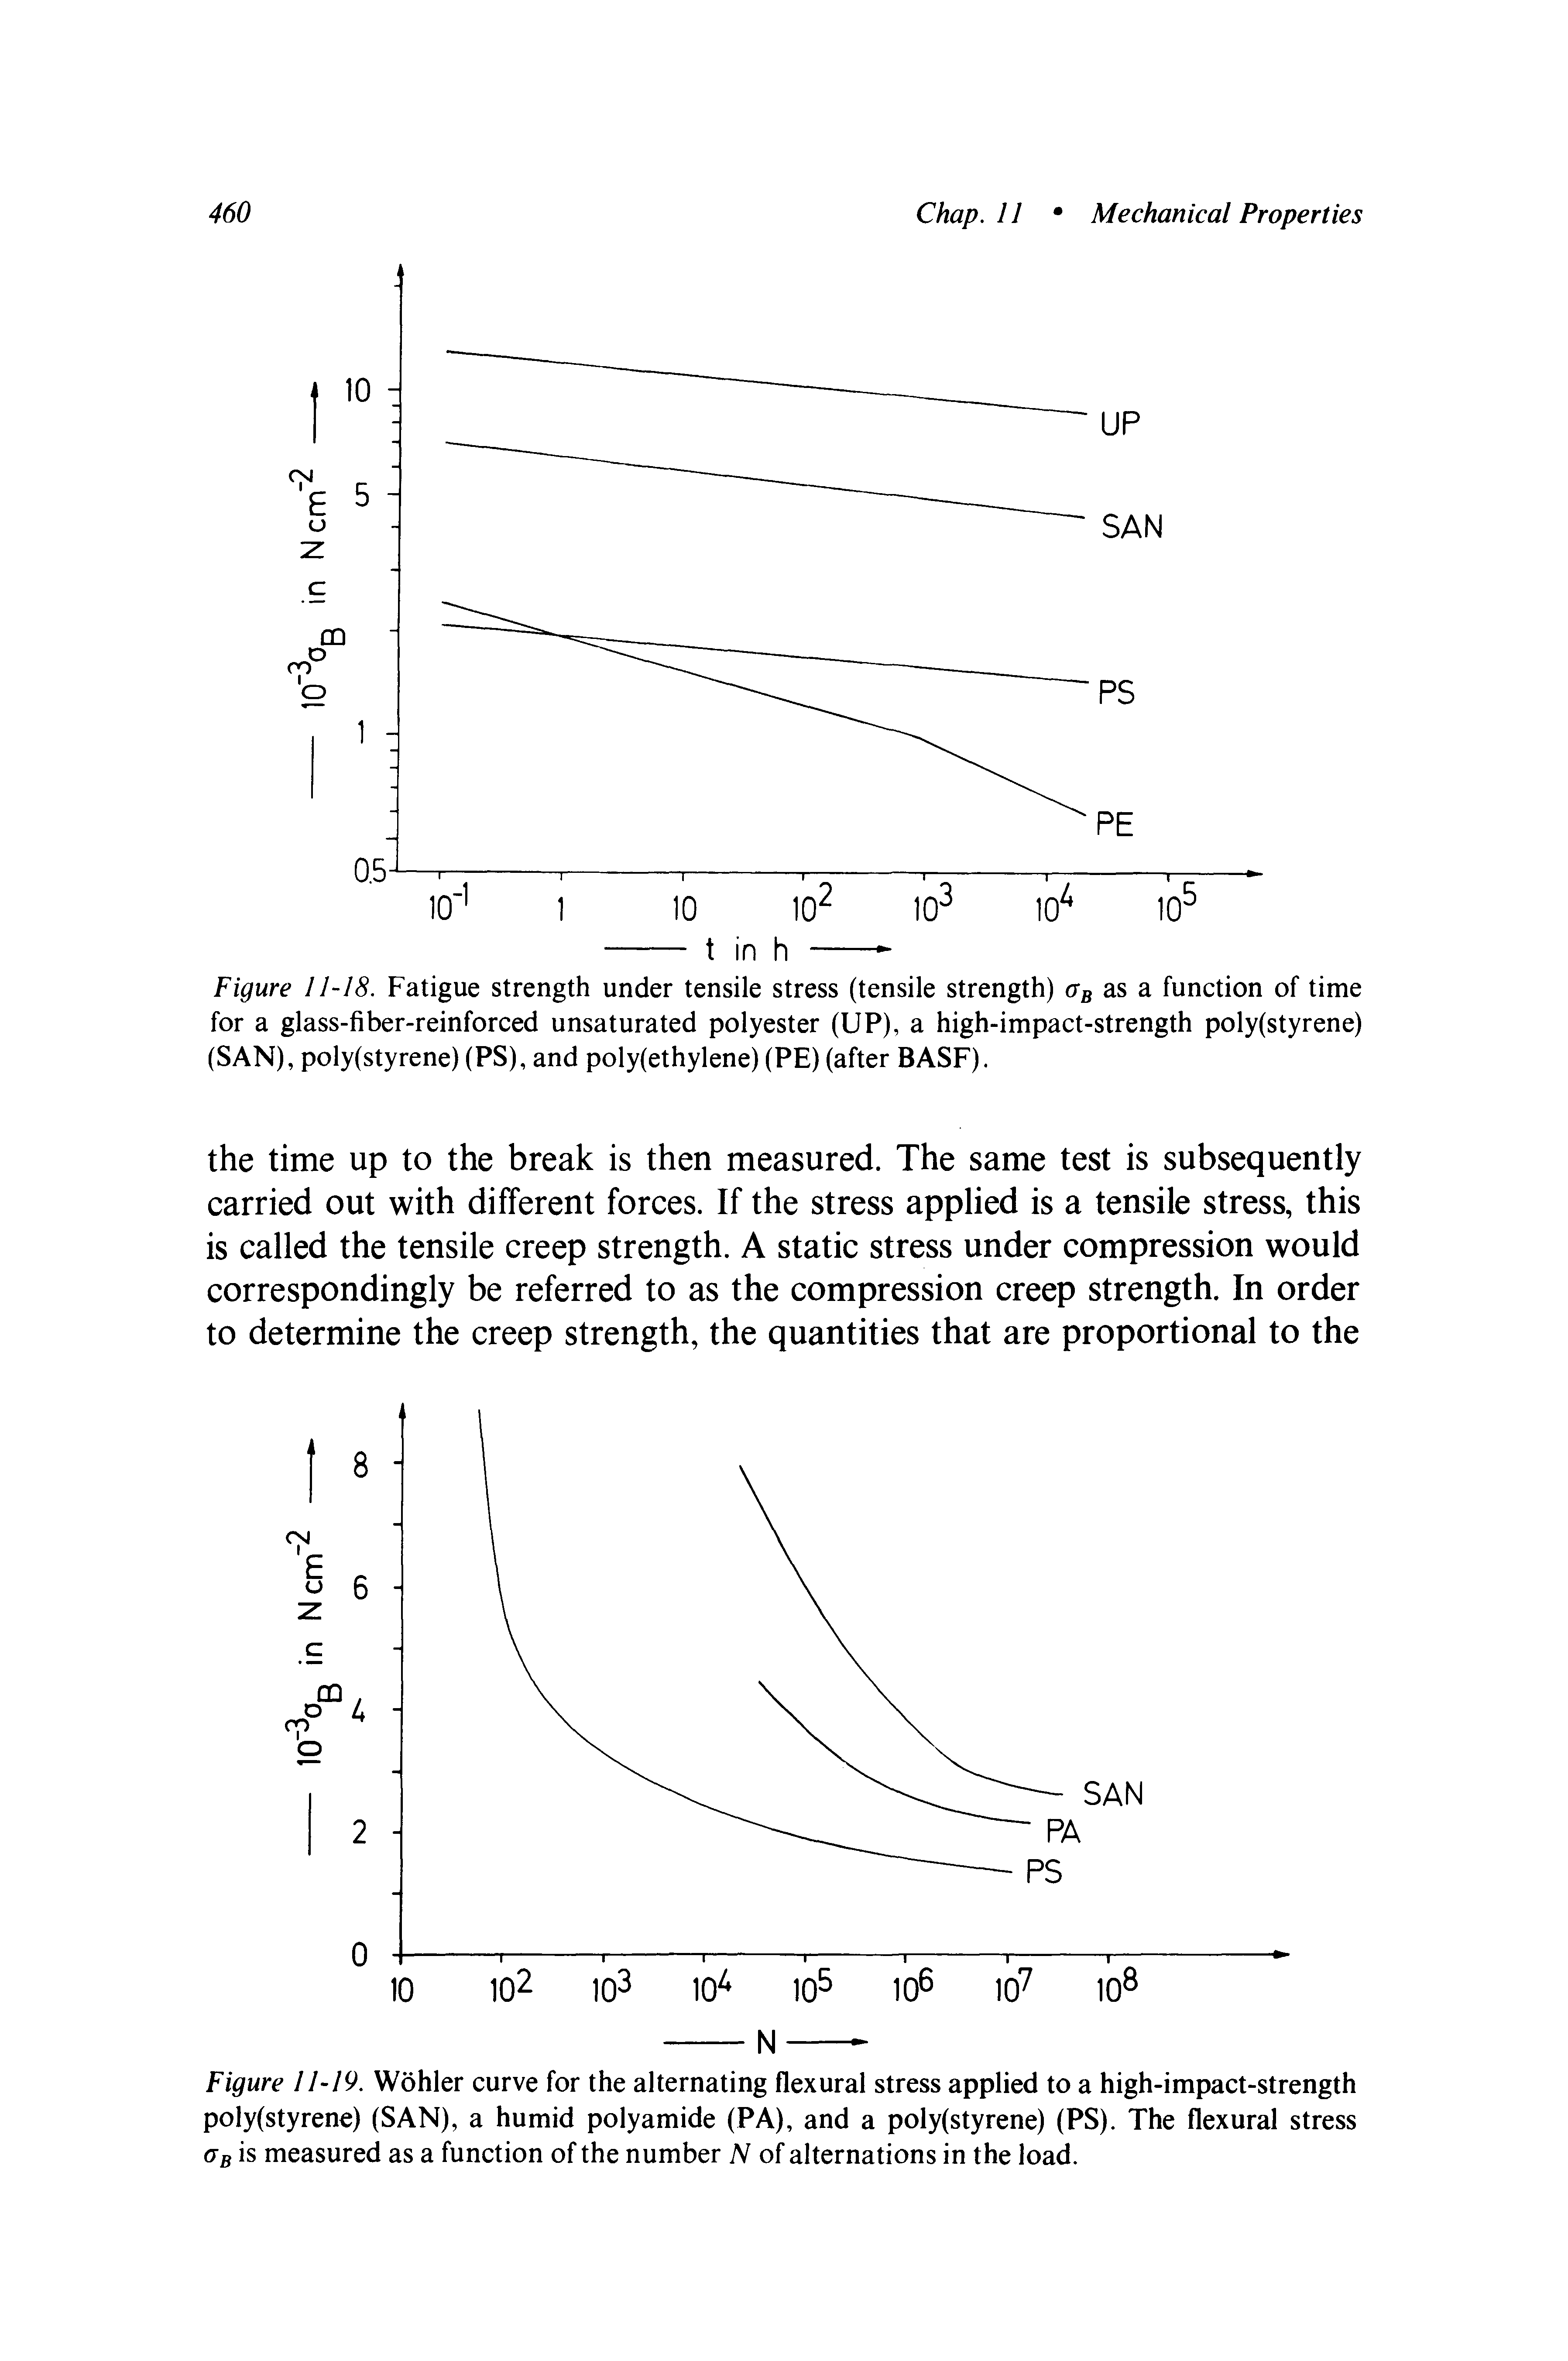 Figure 11-18. Fatigue strength under tensile stress (tensile strength) as a function of time for a glass-fiber-reinforced unsaturated polyester (UP), a high-impact-strength poly(styrene) (SAN), poly(styrene) (PS), and poly(ethylene) (PE) (after BASF).